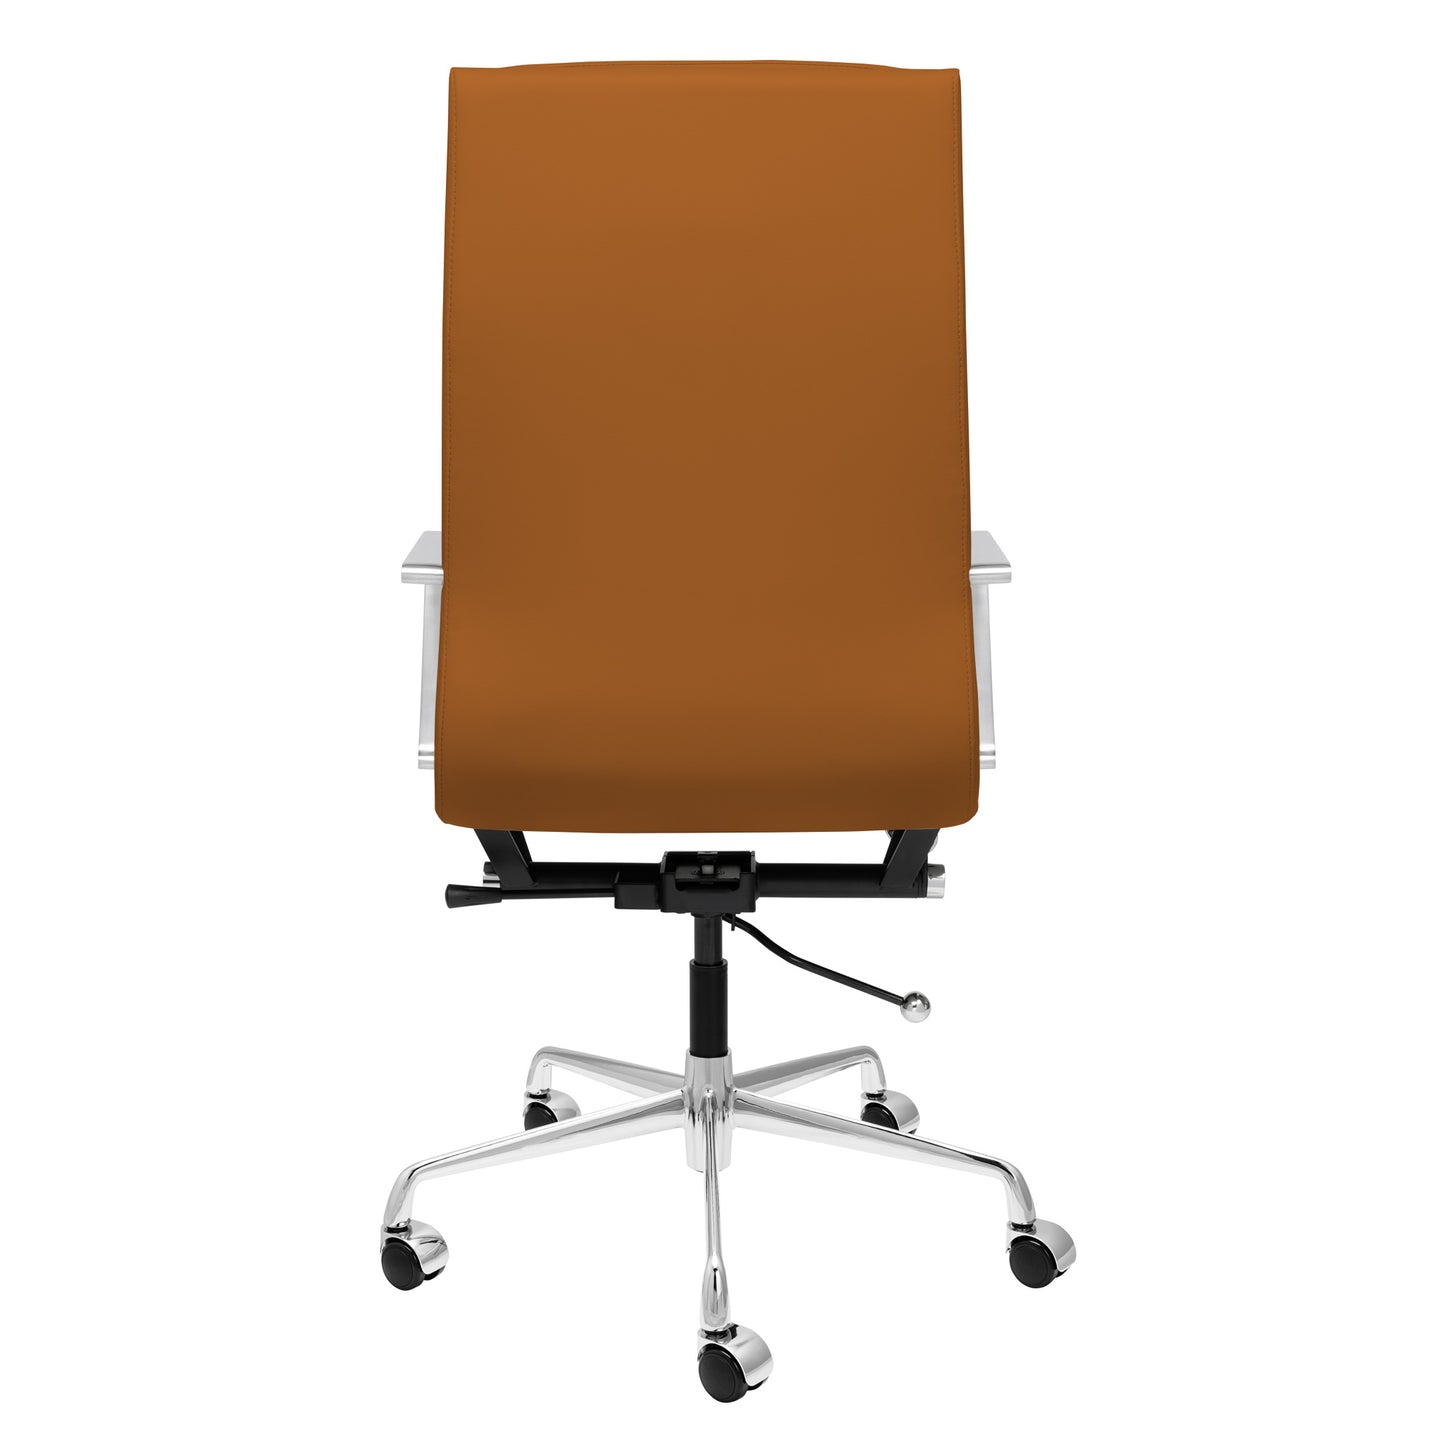 SOHO II Tall Back Padded Management Chair (Brown)